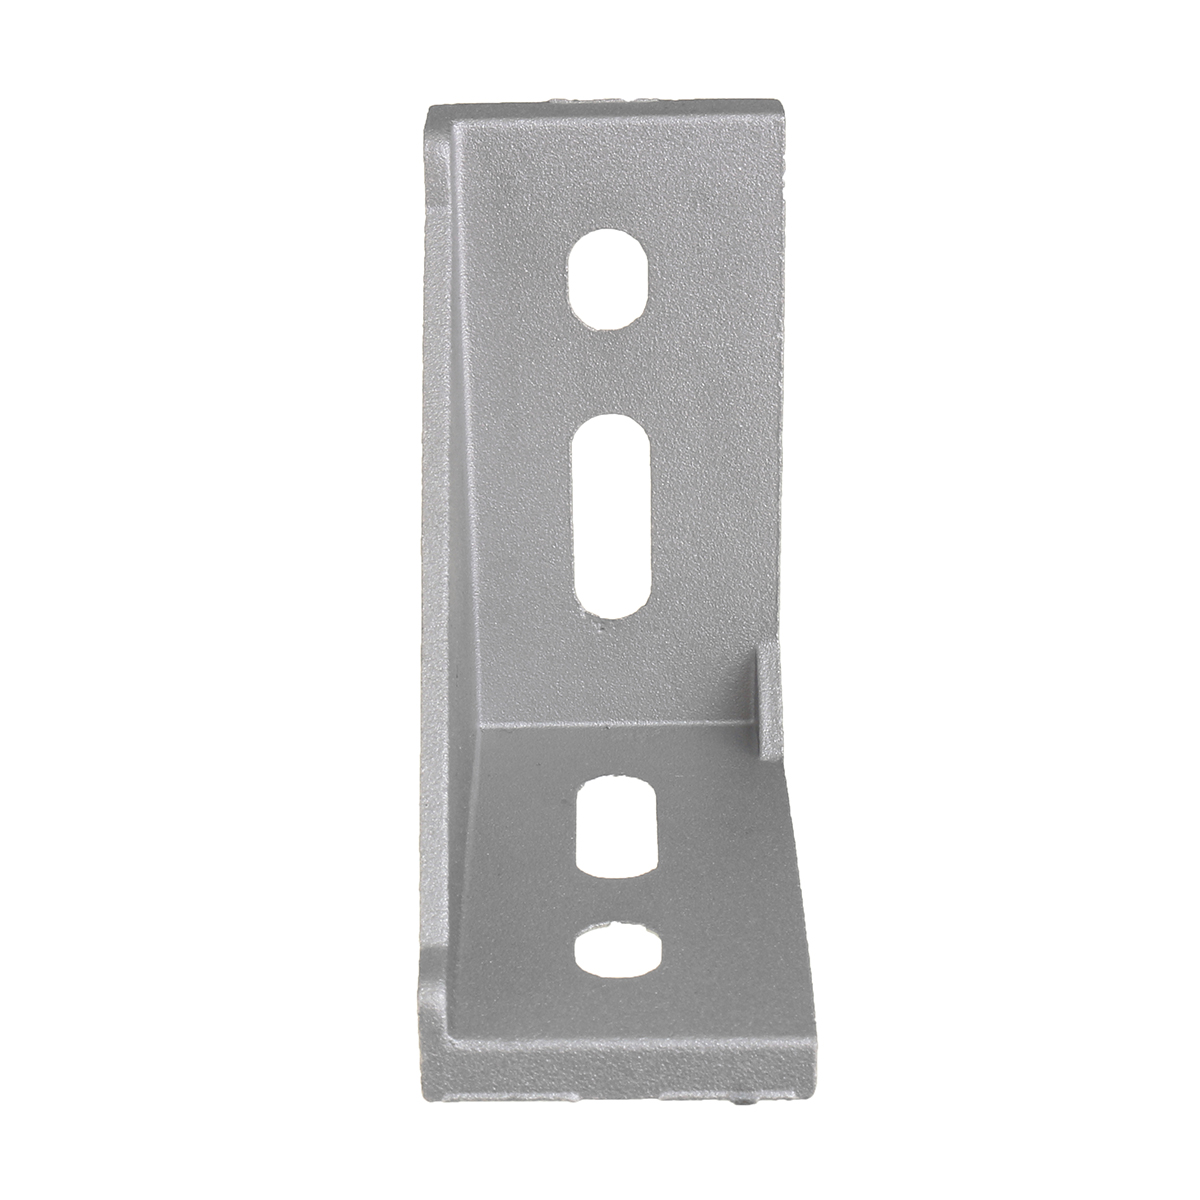 Sulevetrade-AJ40-40times80mm-Aluminum-Angle-Corner-Joint-Connector-90-degrees-4080-Series-Aluminum-P-1293672-5